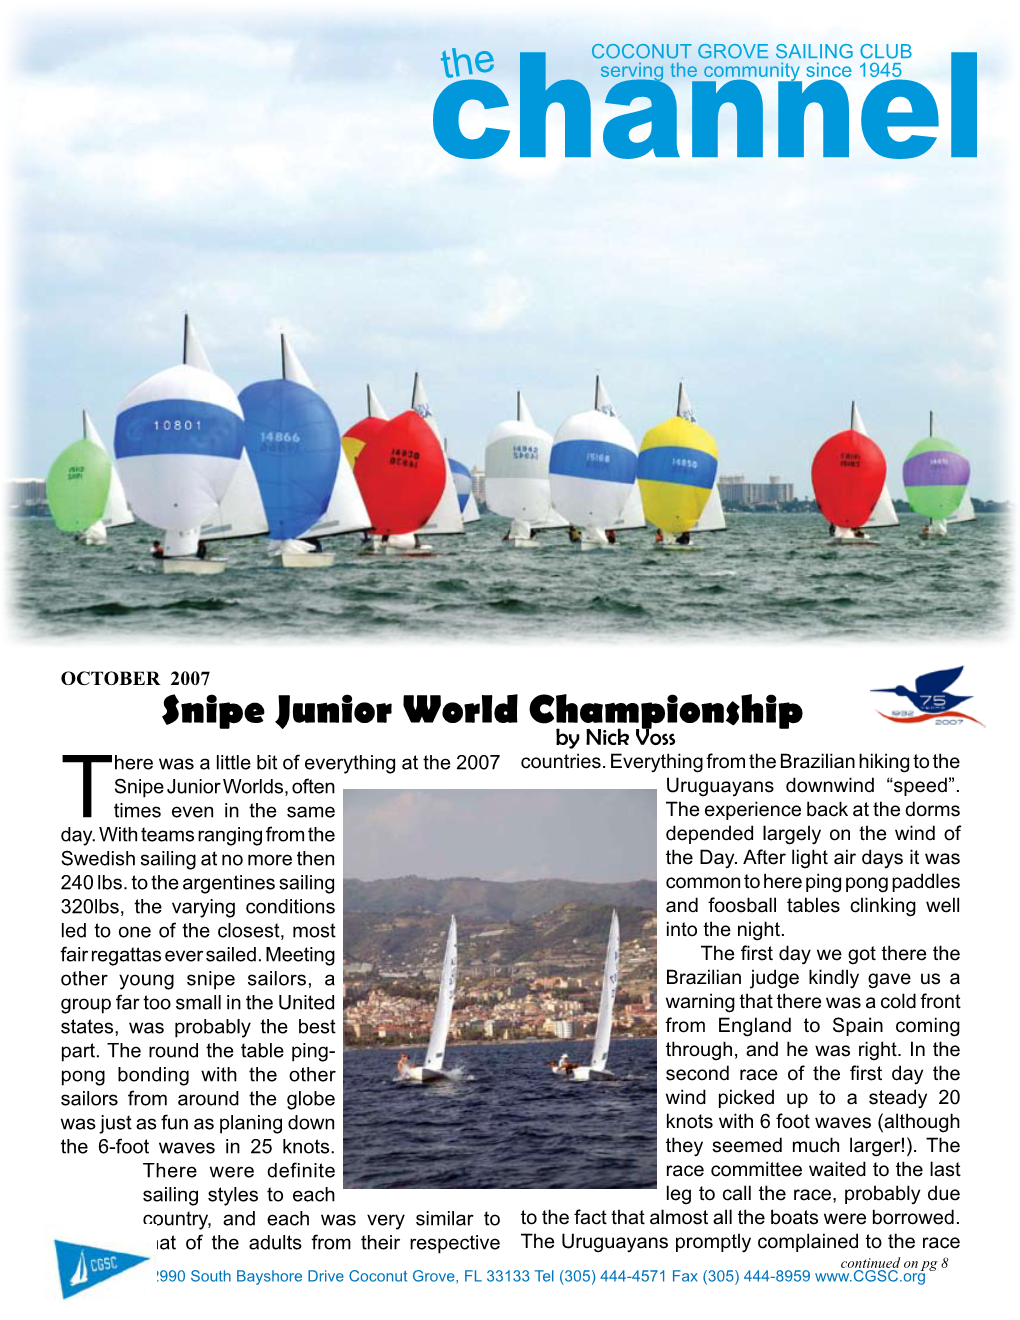 Snipe Junior World Championship by Nick Voss Here Was a Little Bit of Everything at the 2007 Countries